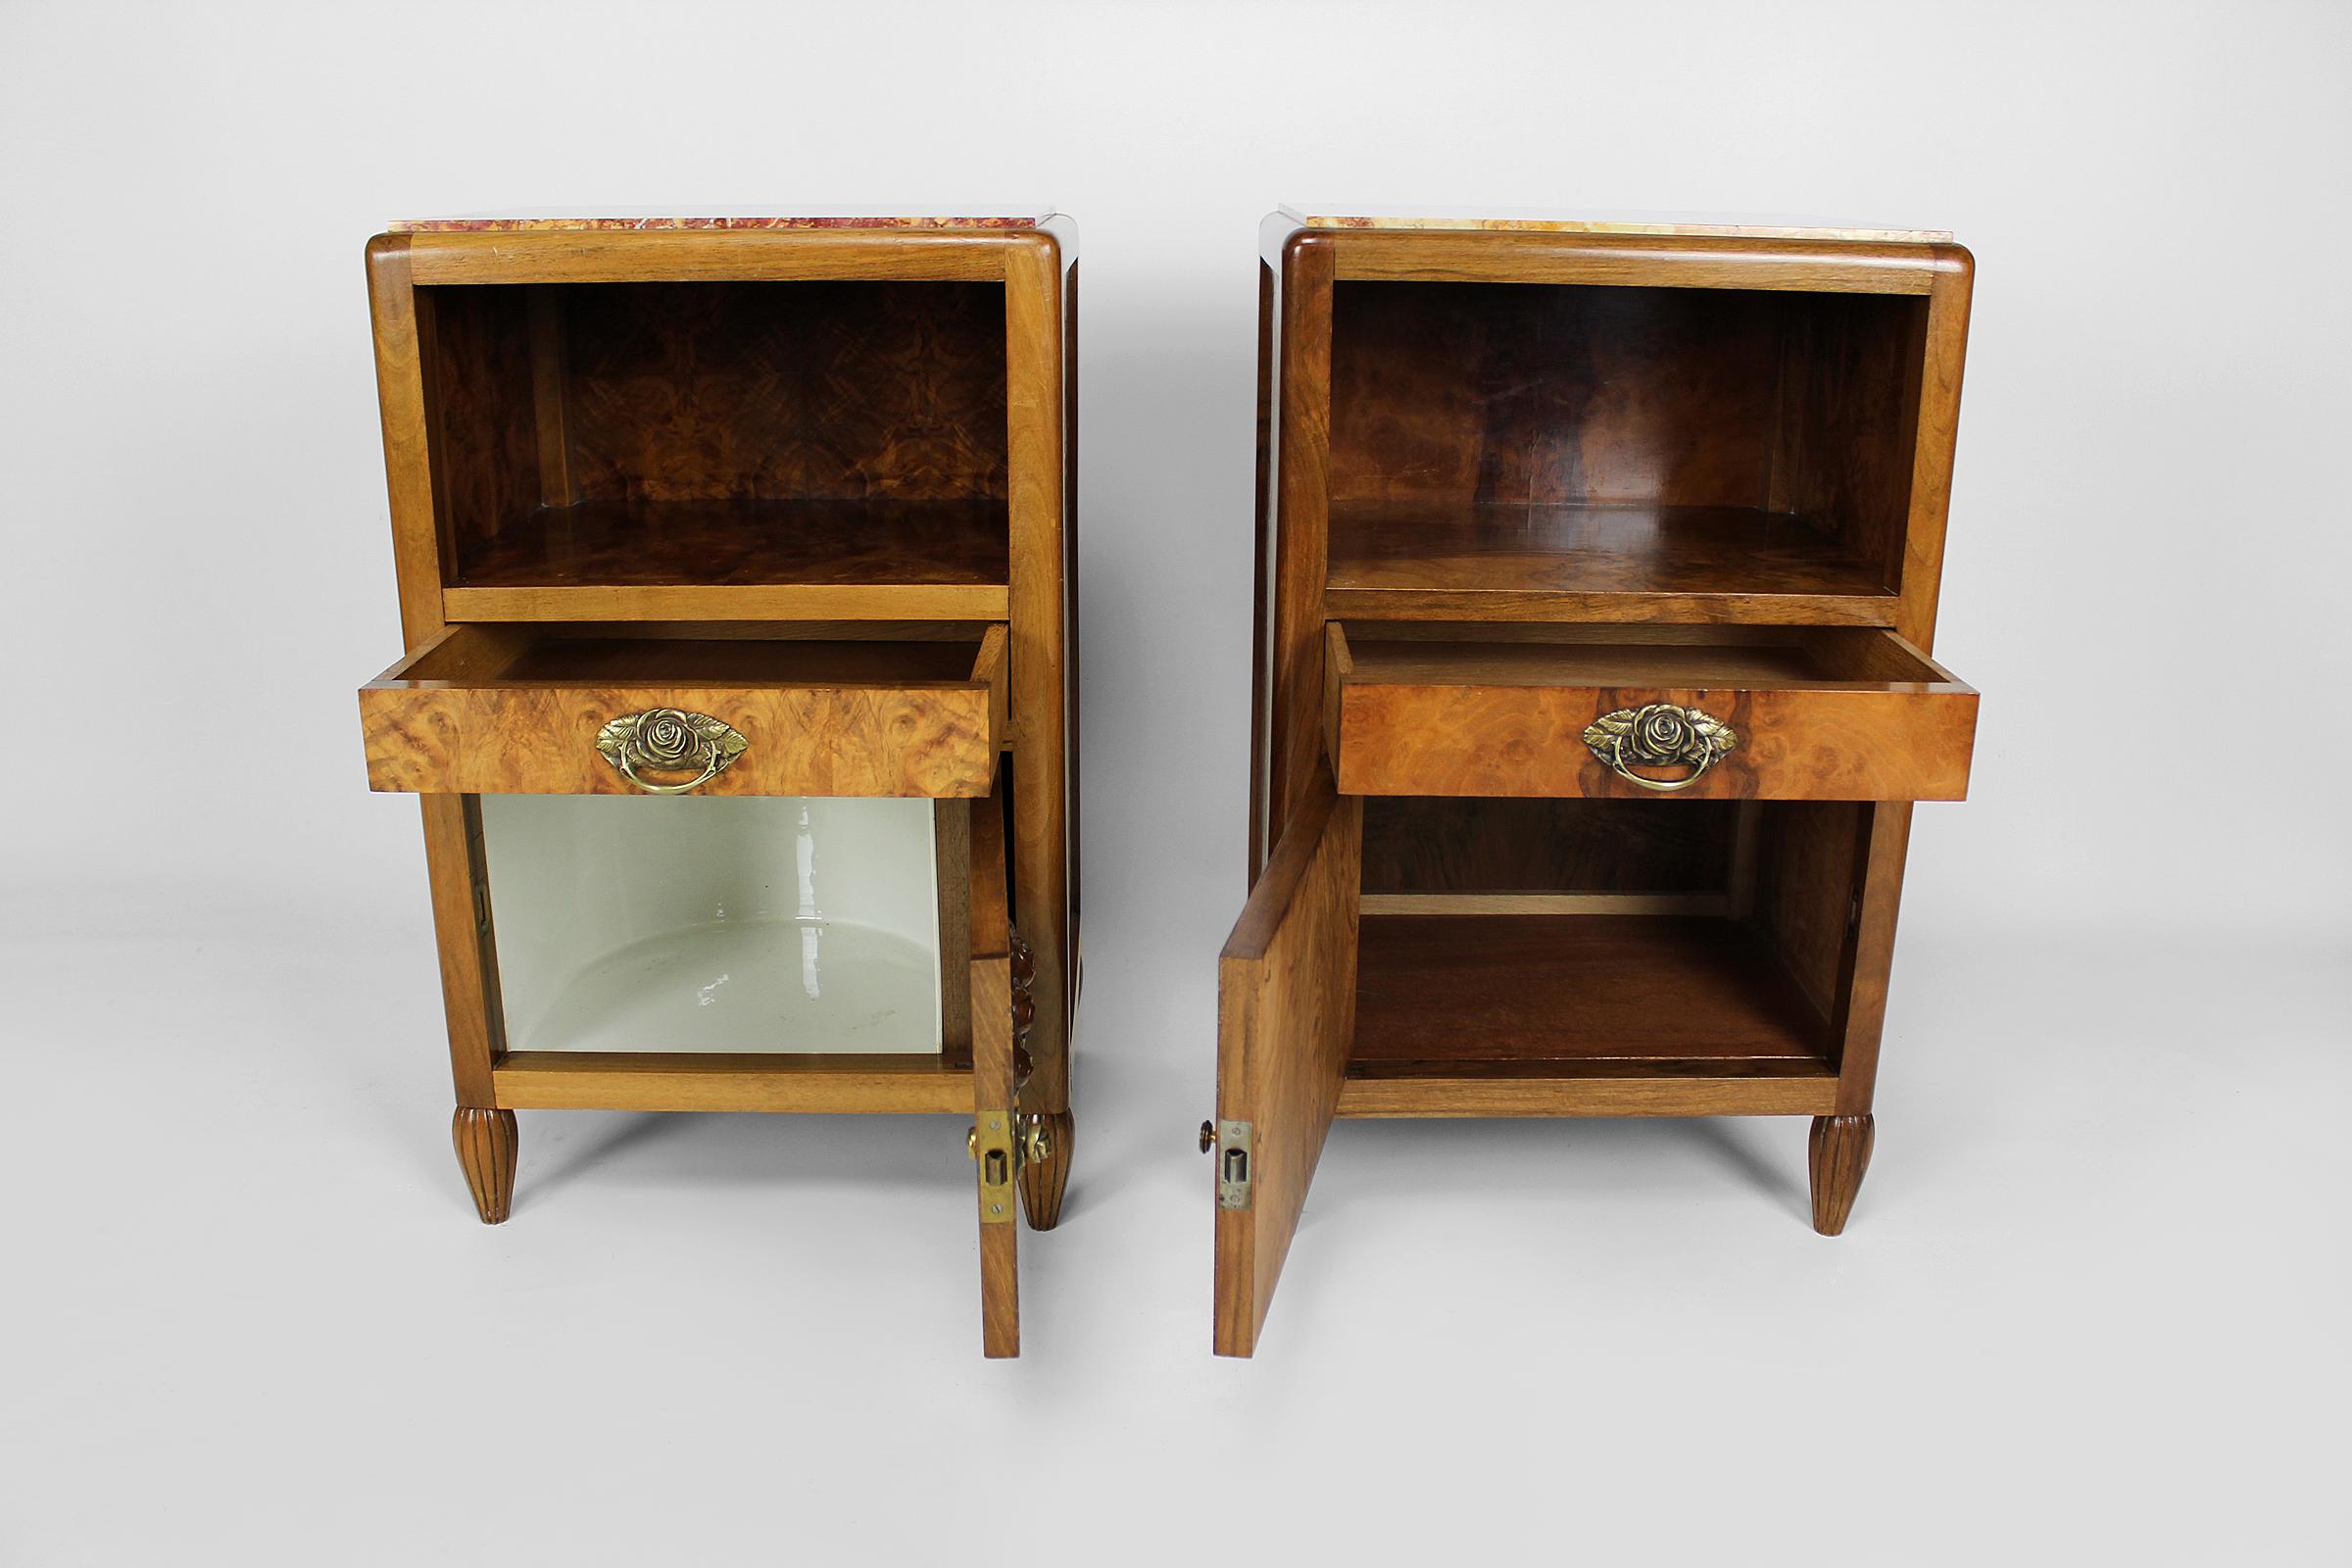 Pair of Art Deco Bedside Tables by Ateliers Gauthier-Poinsignon, circa 1920-1930 For Sale 2